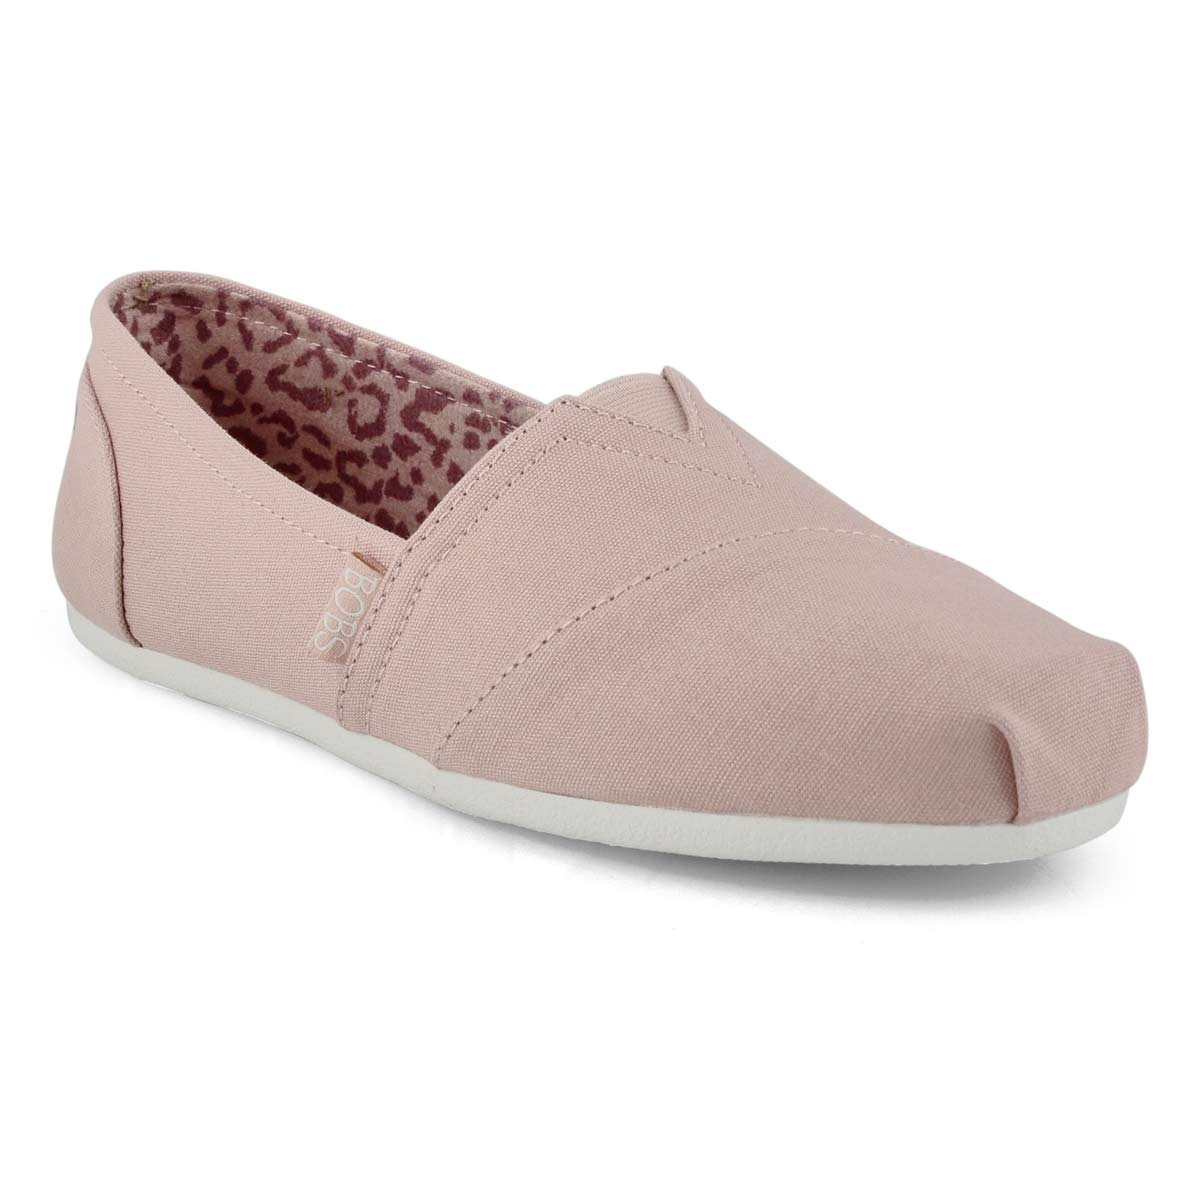 skechers bobs shoes canada